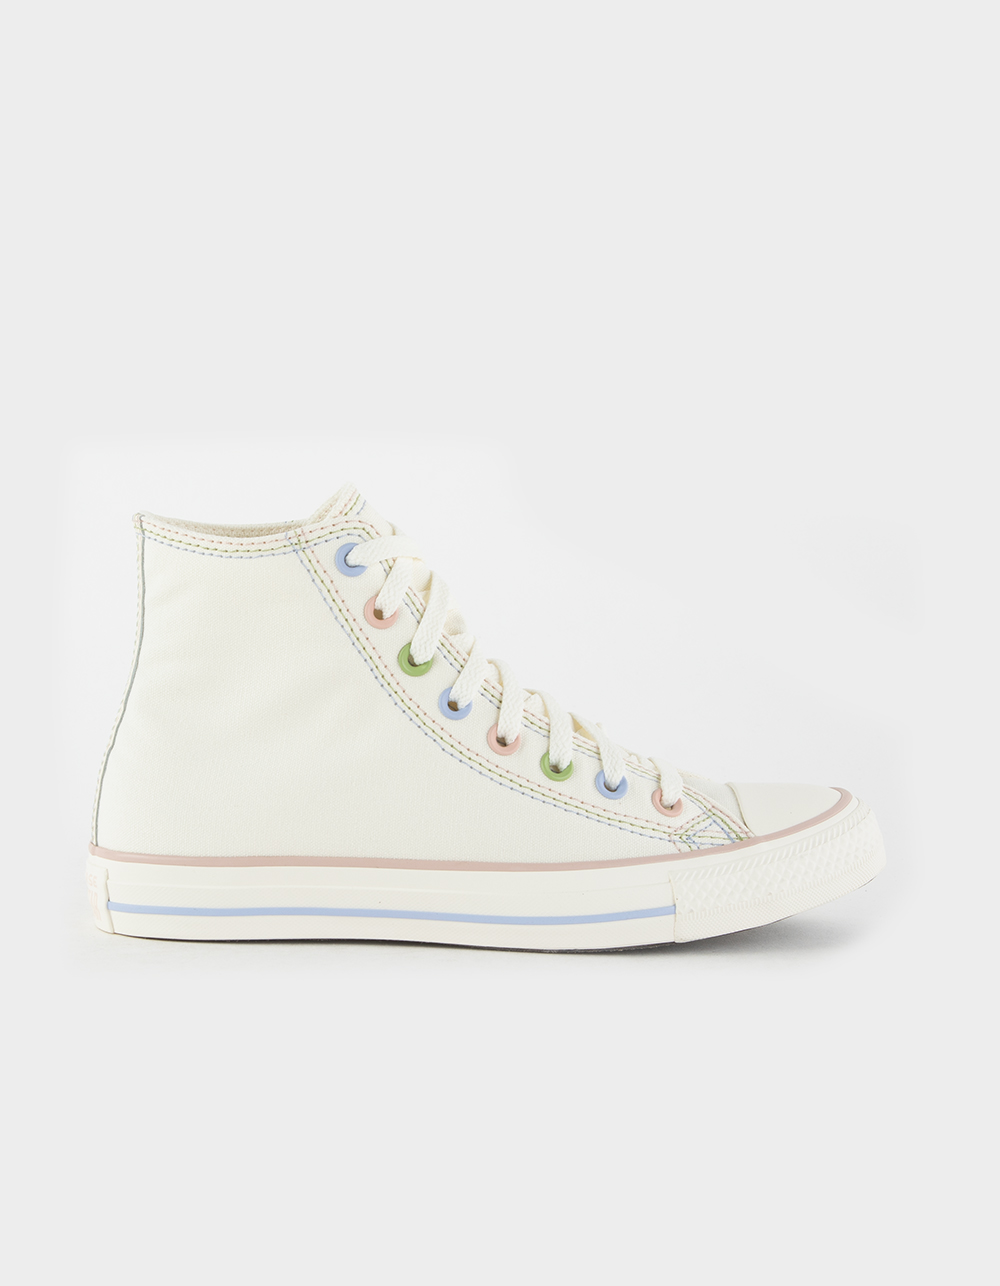 CONVERSE Chuck Taylor All Star Vintage Remastered Womens Shoes - WHITE ...